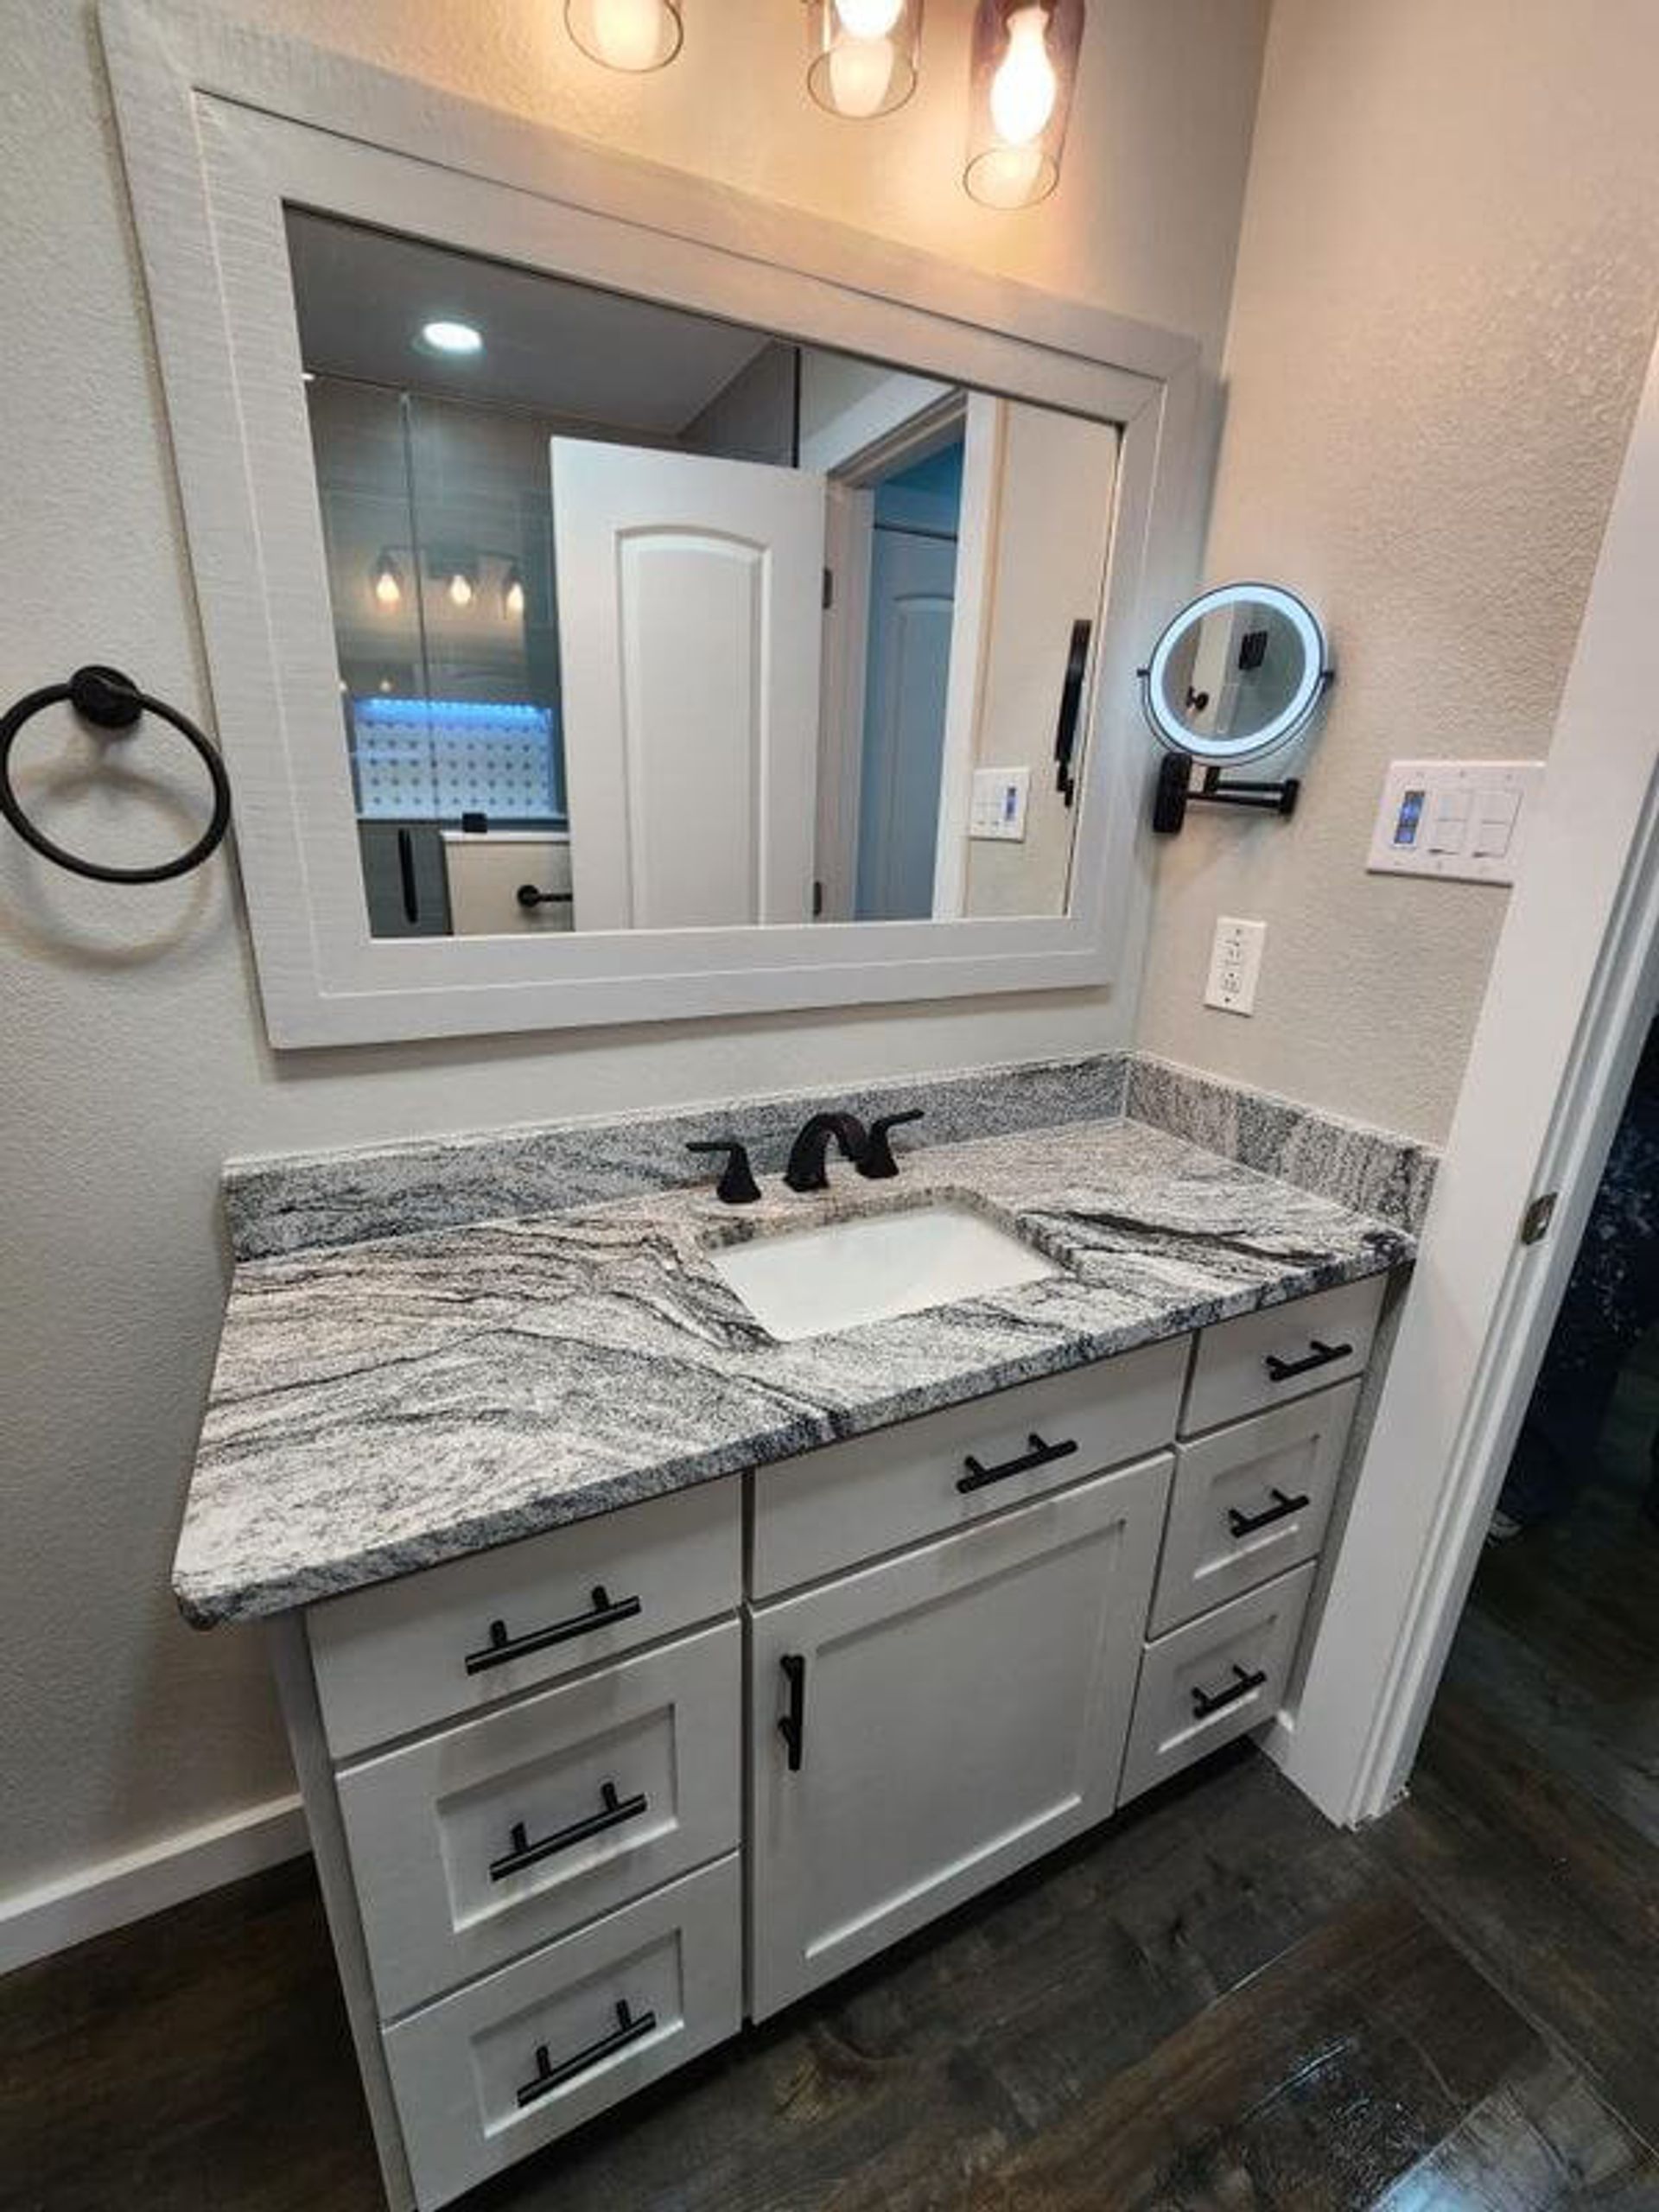 Vanities and cabinets